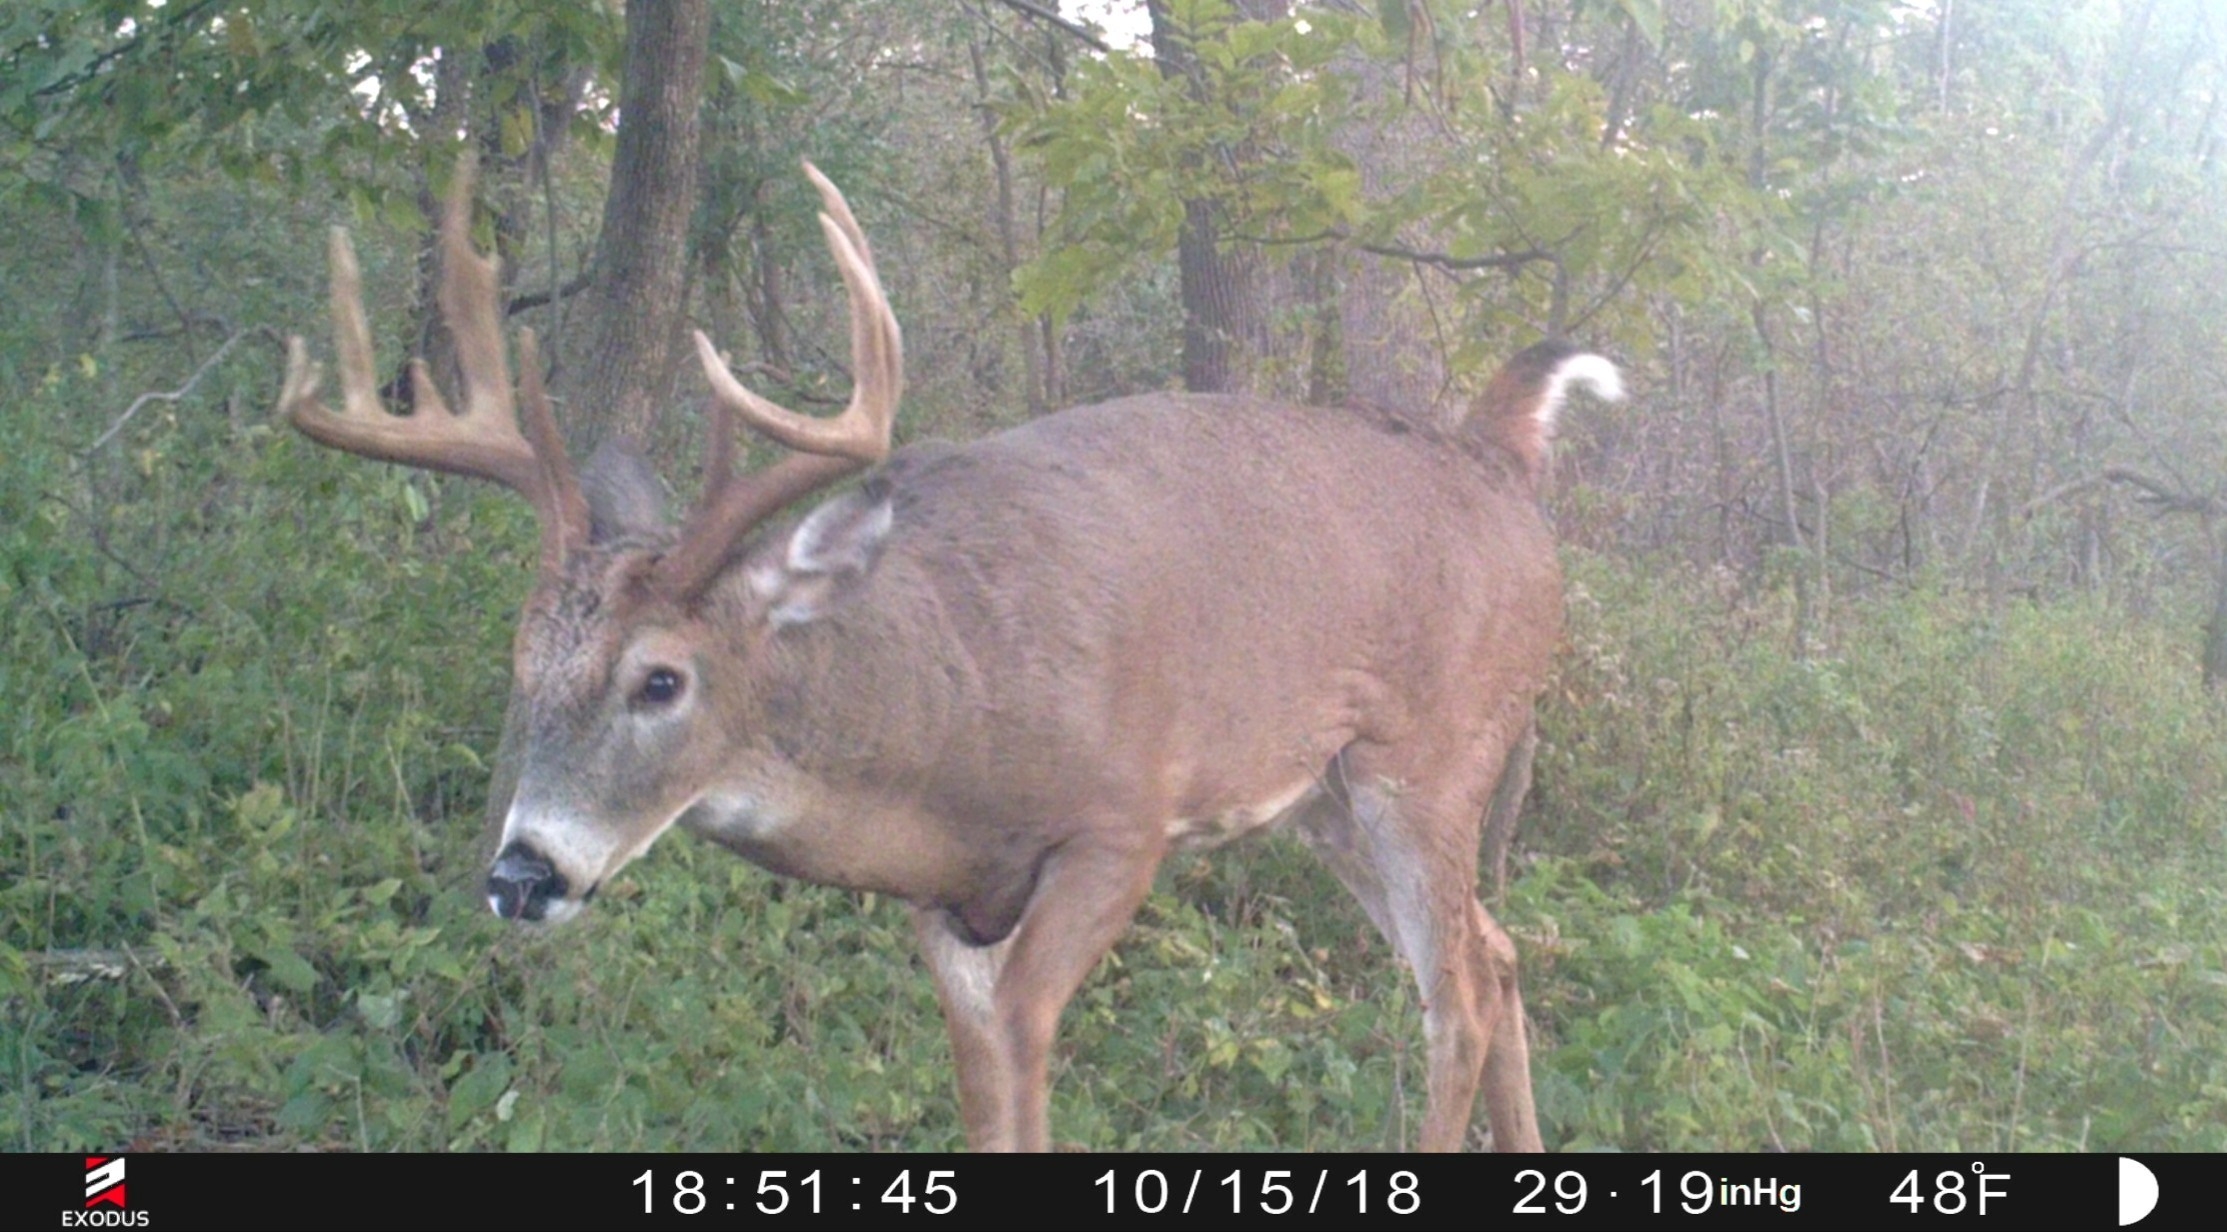 When Will The Whitetail Rut Begin | Whitetail Habitat Solutions-Deer Rut Forecast 2021